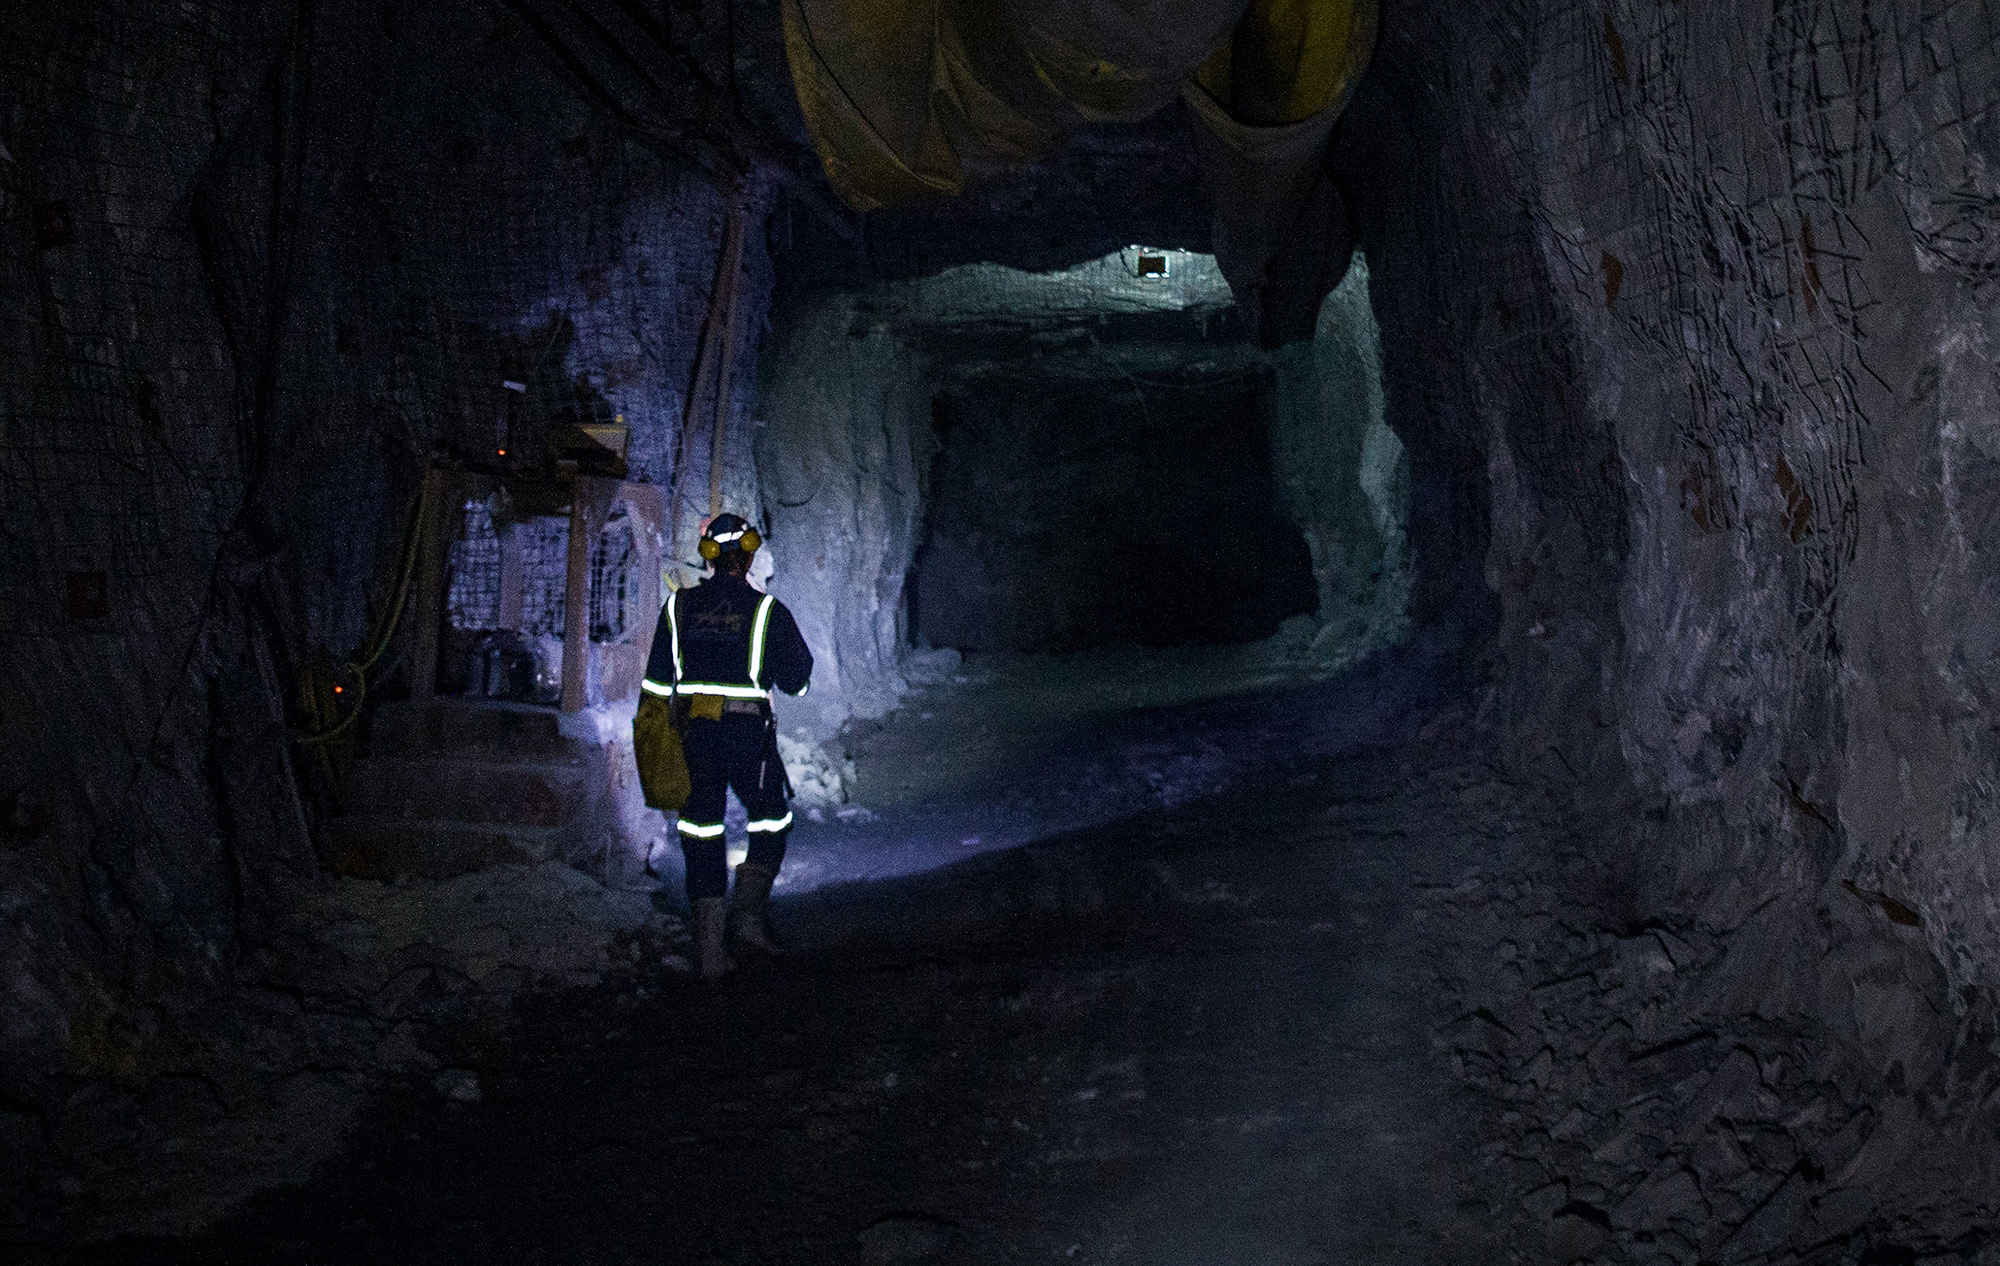 A contractor works at an underground mine in Malartic, Quebec, Canada.